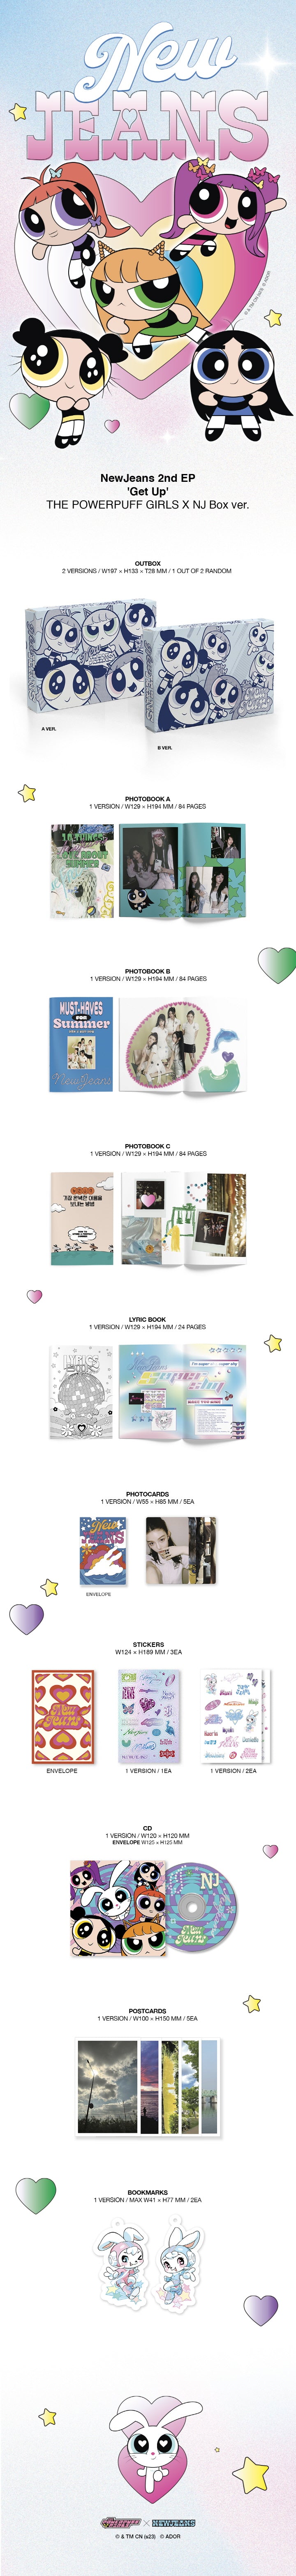 1 CD
3 Photo Books (84 pages per book)
1 Lyrics Paper (24 pages)
5 Postcards
2 Bookmarks
3 Stickers
5 Photo Cards